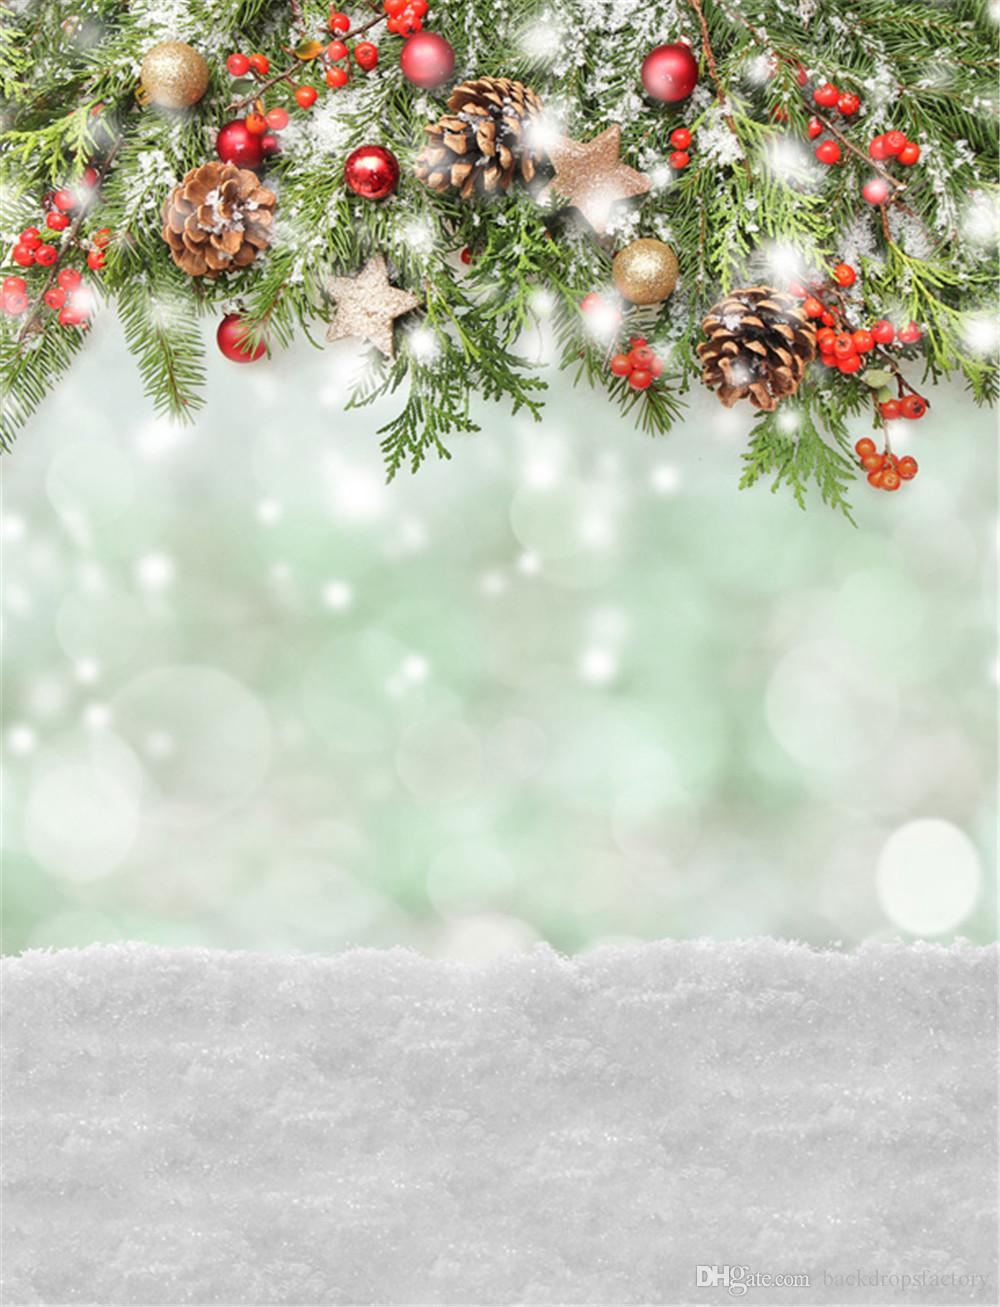 Free Christmas Background Image, Download Free Clip Art, Free Clip Art on Clipart Library